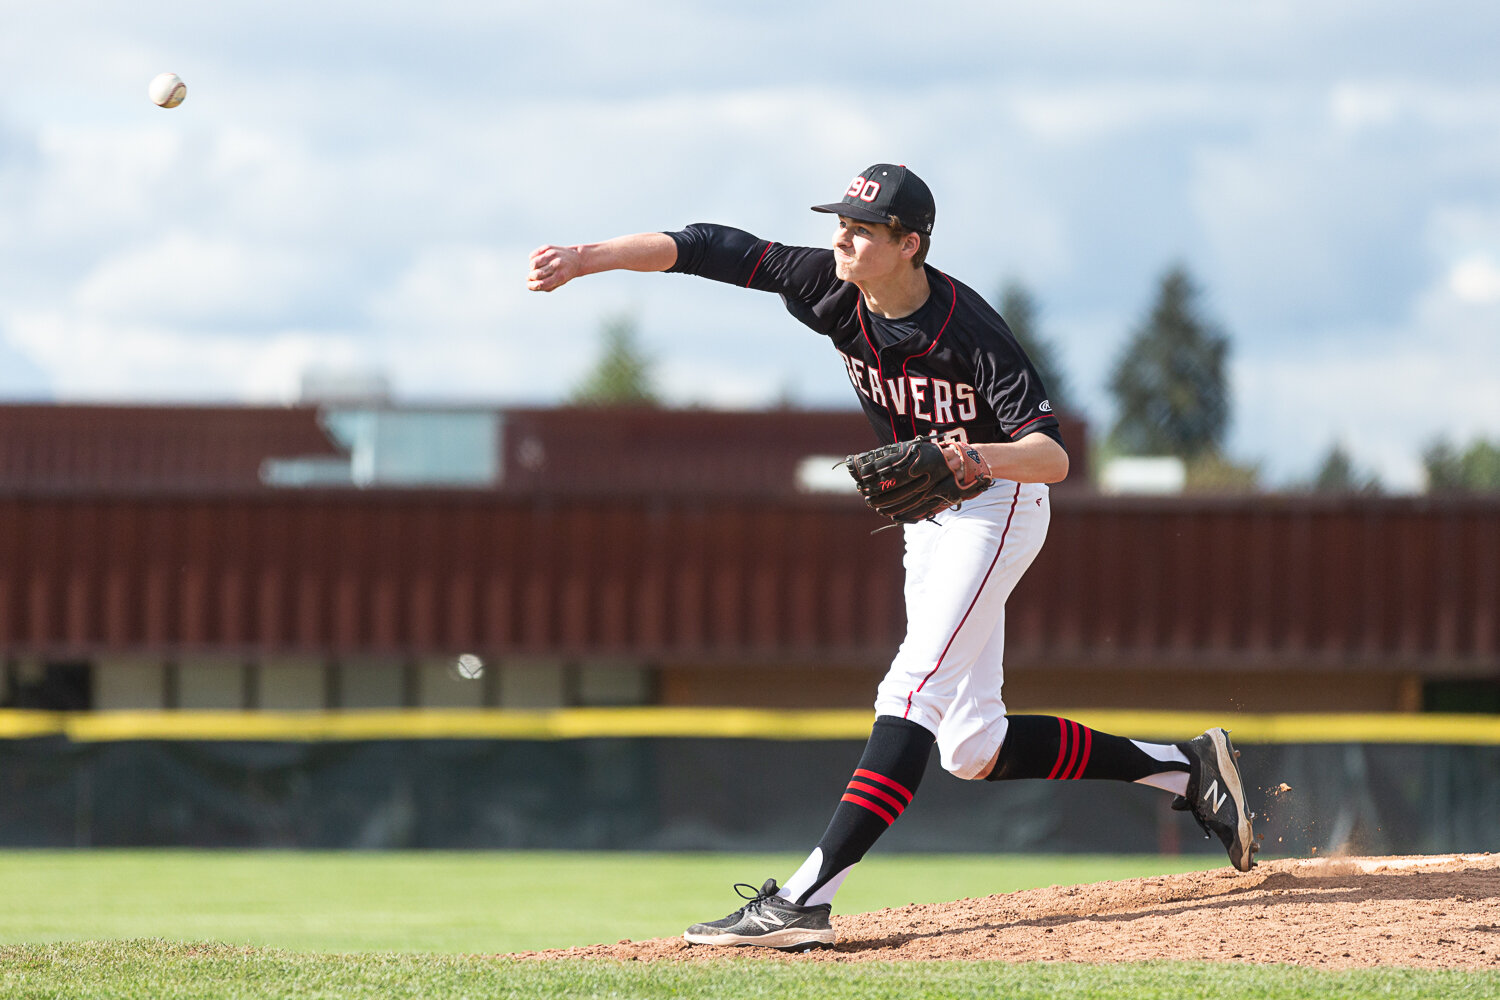 Tenino reliever Jack Burkhardt tosses a pitch against La Center in the 1A District 4 semifinals May 9 at Castle Rock.